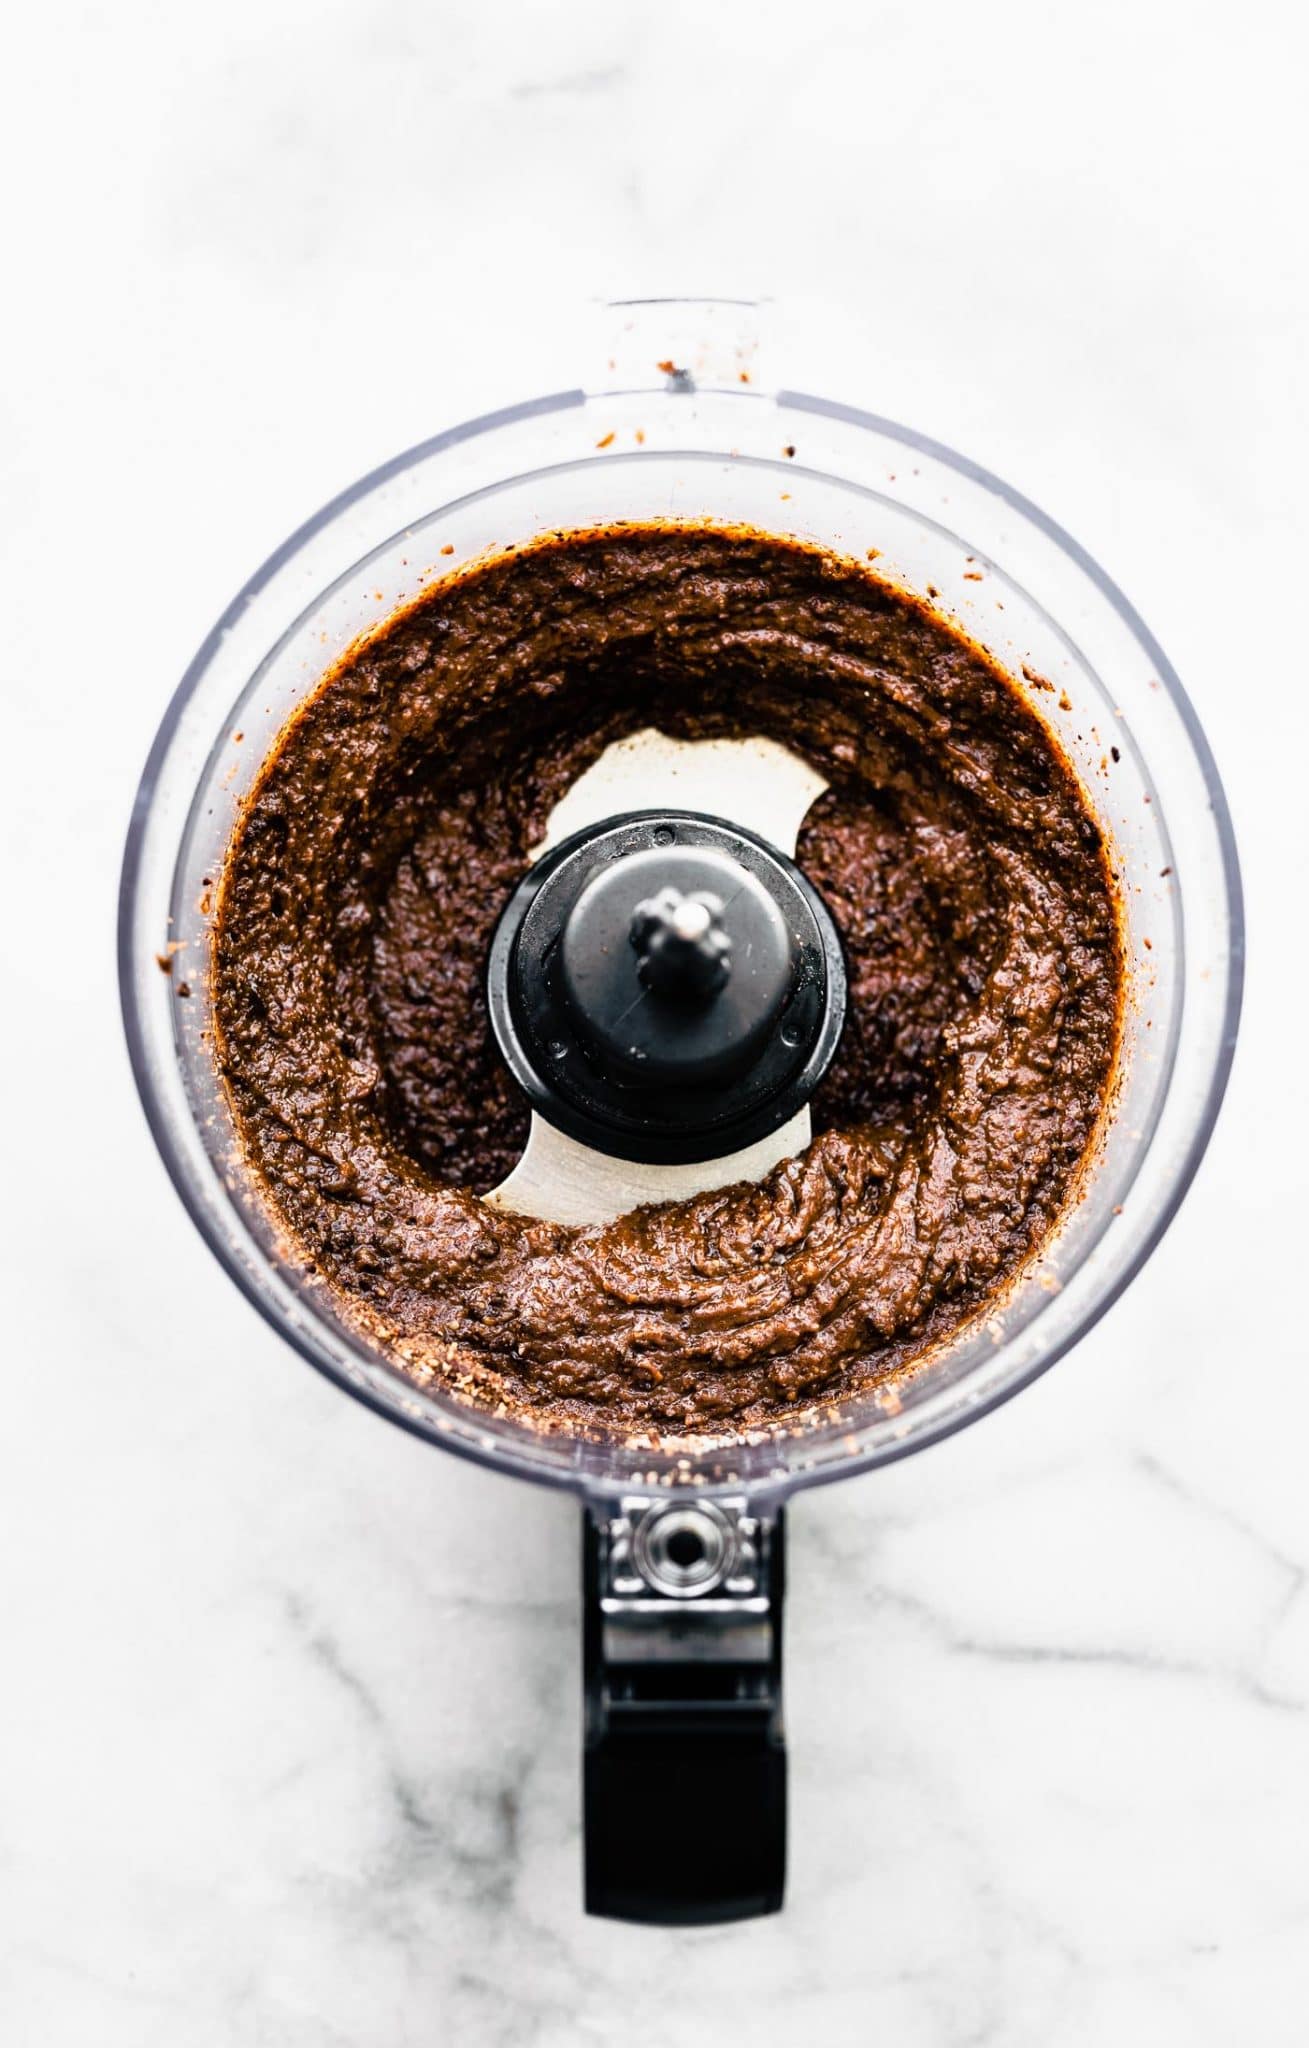 Overhead image of food processor with chocolate cookie batter.